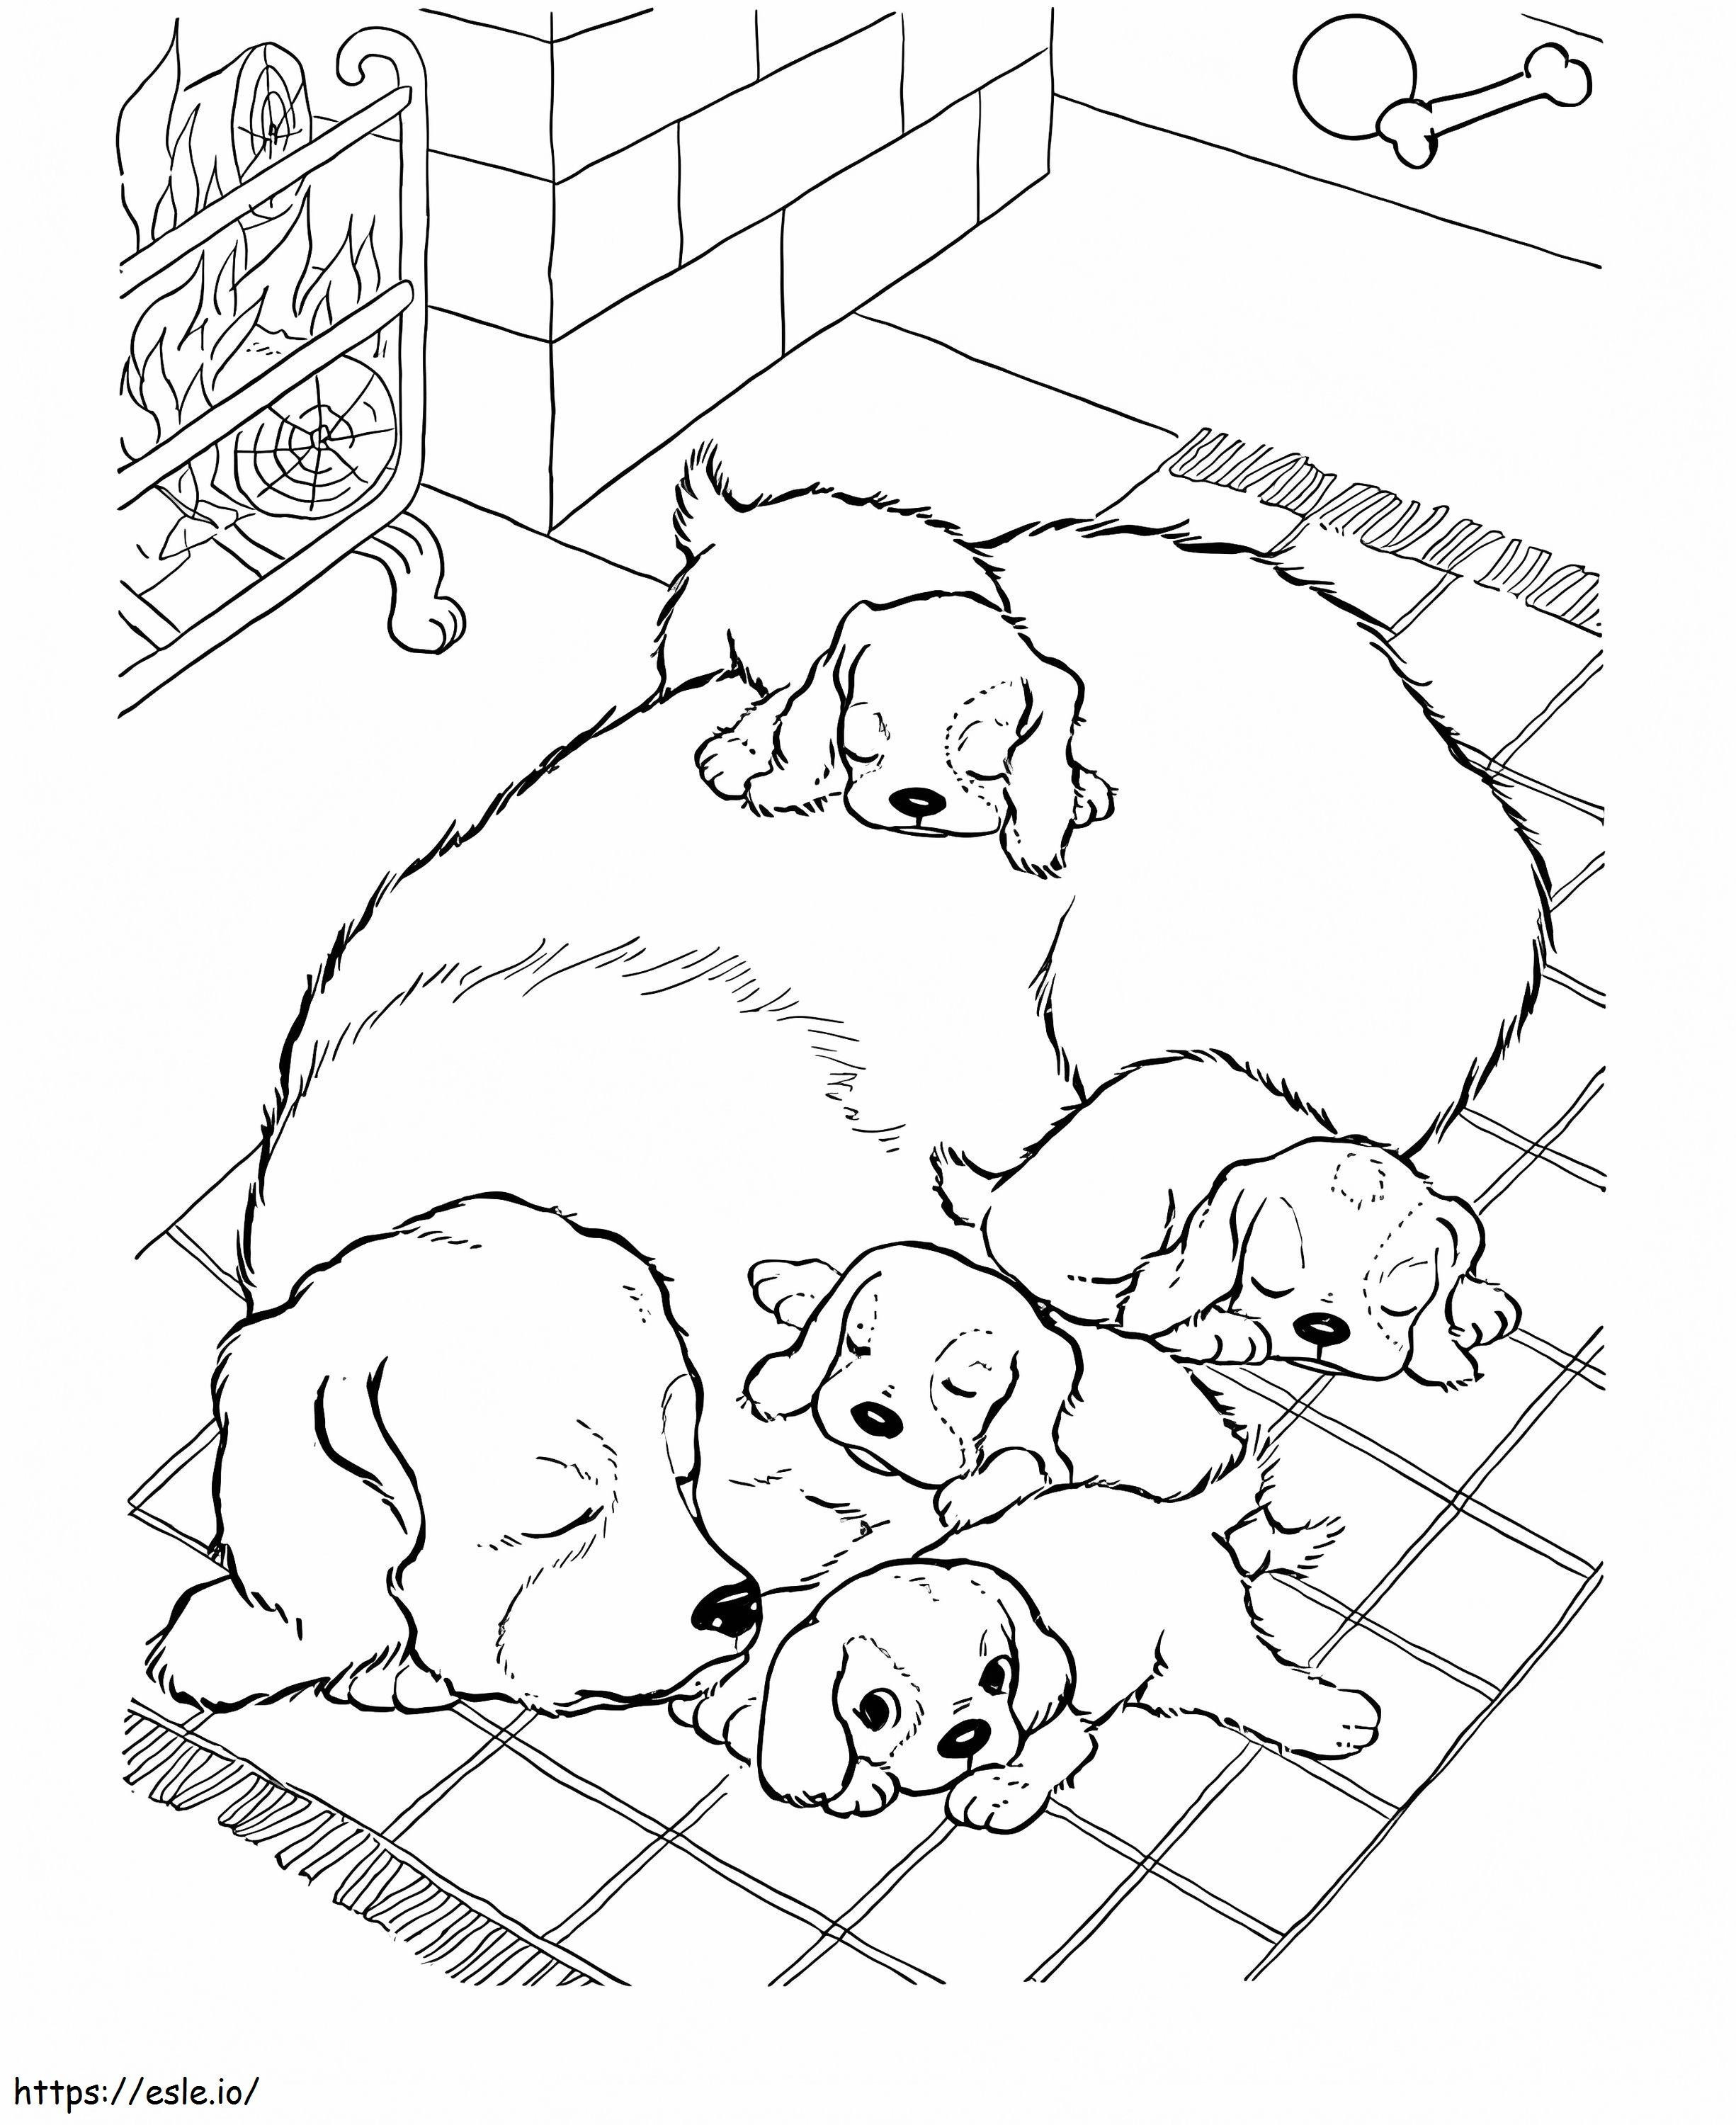 Sleeping Puppies coloring page